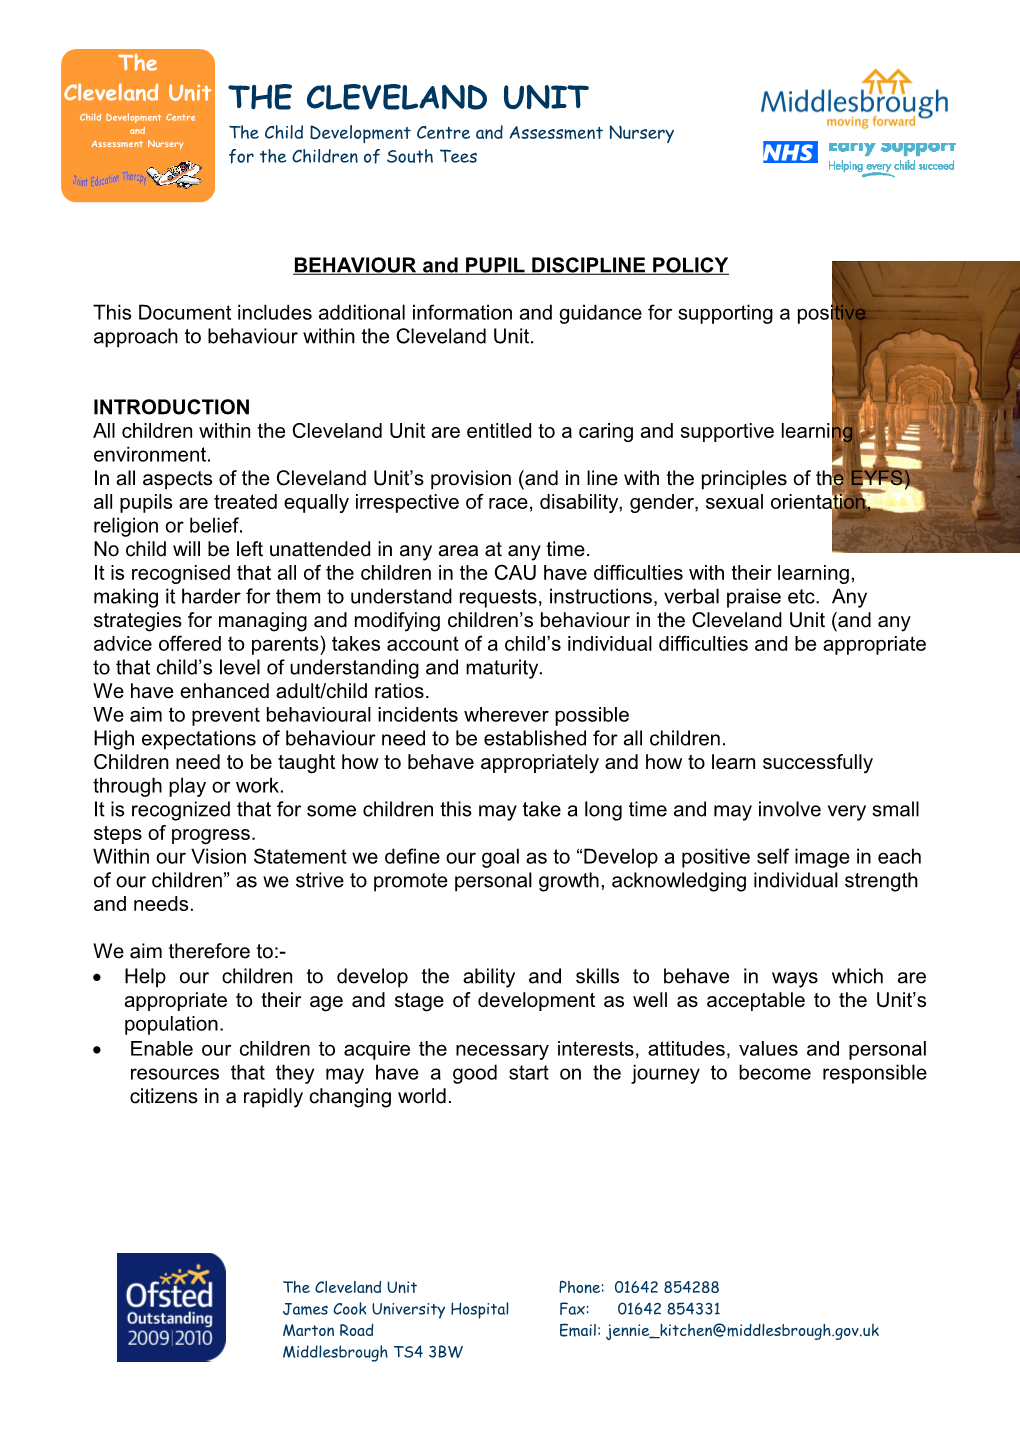 BEHAVIOUR and PUPIL DISCIPLINE POLICY